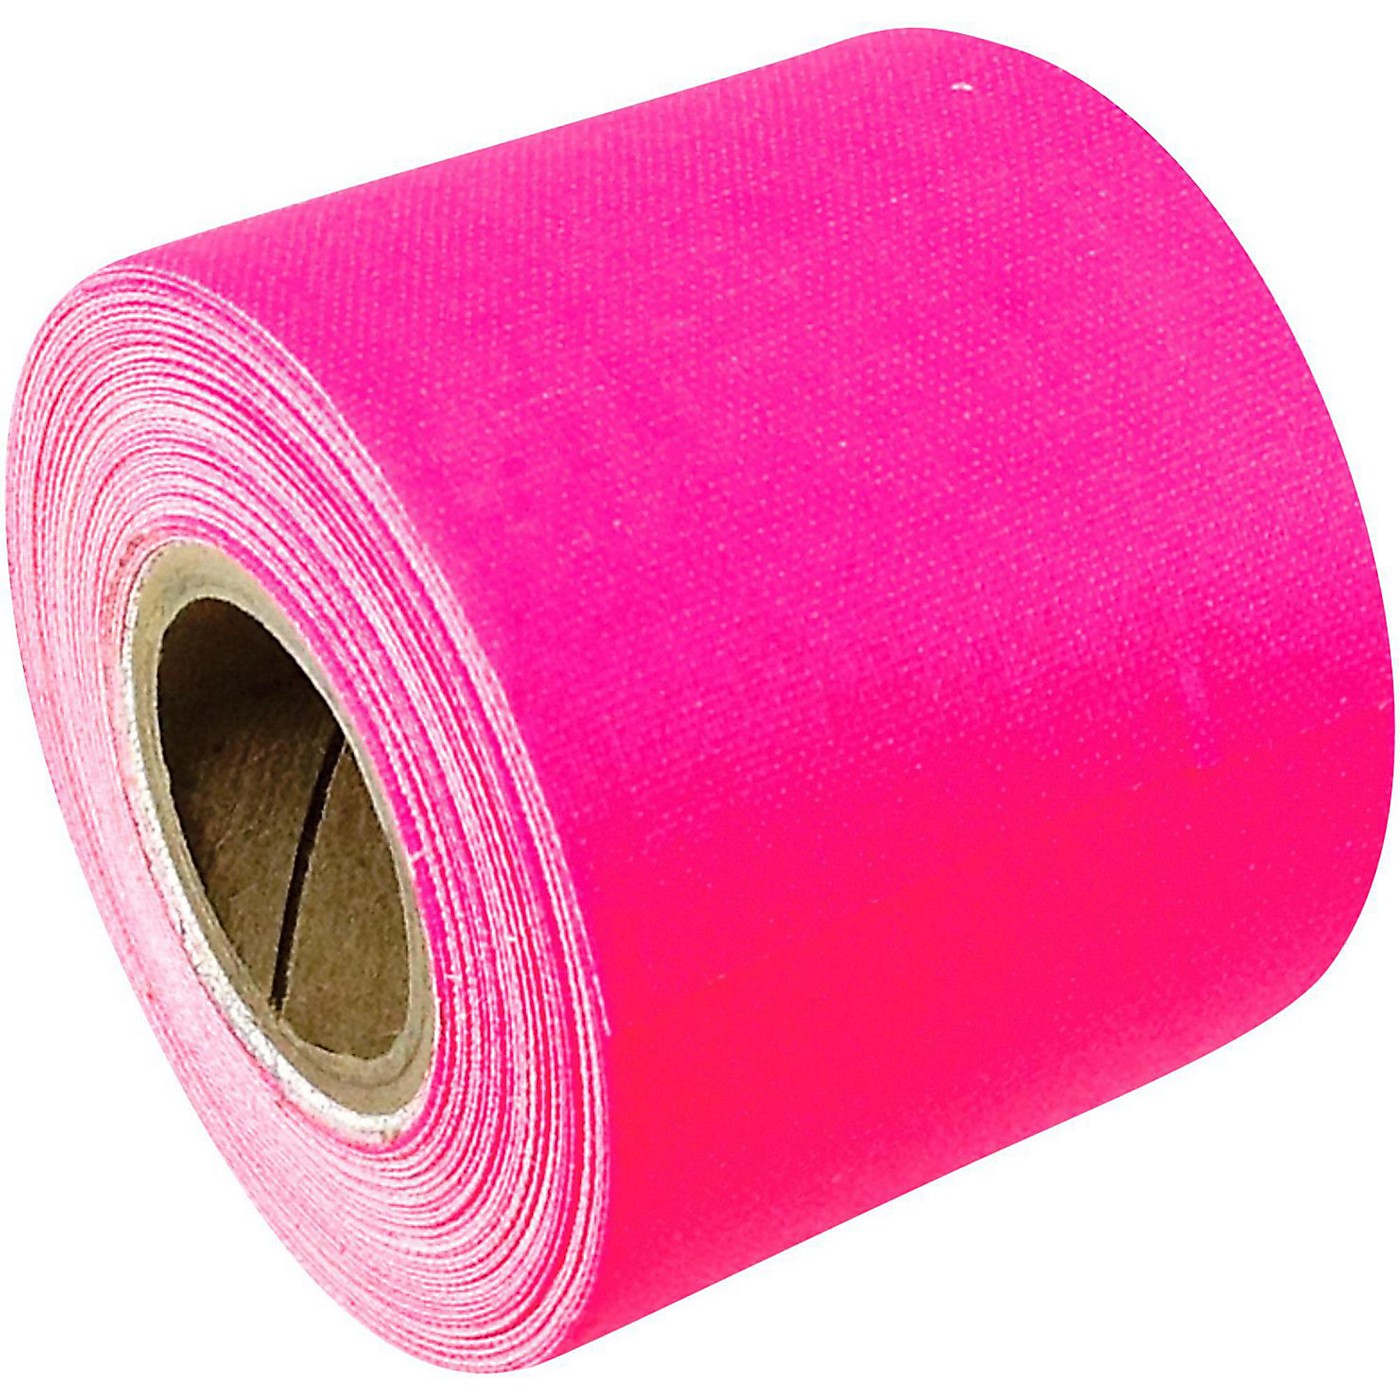 American Recorder Technologies Mini Roll Gaffers Tape 2 In x 8 Yards Flourescent Colors thumbnail